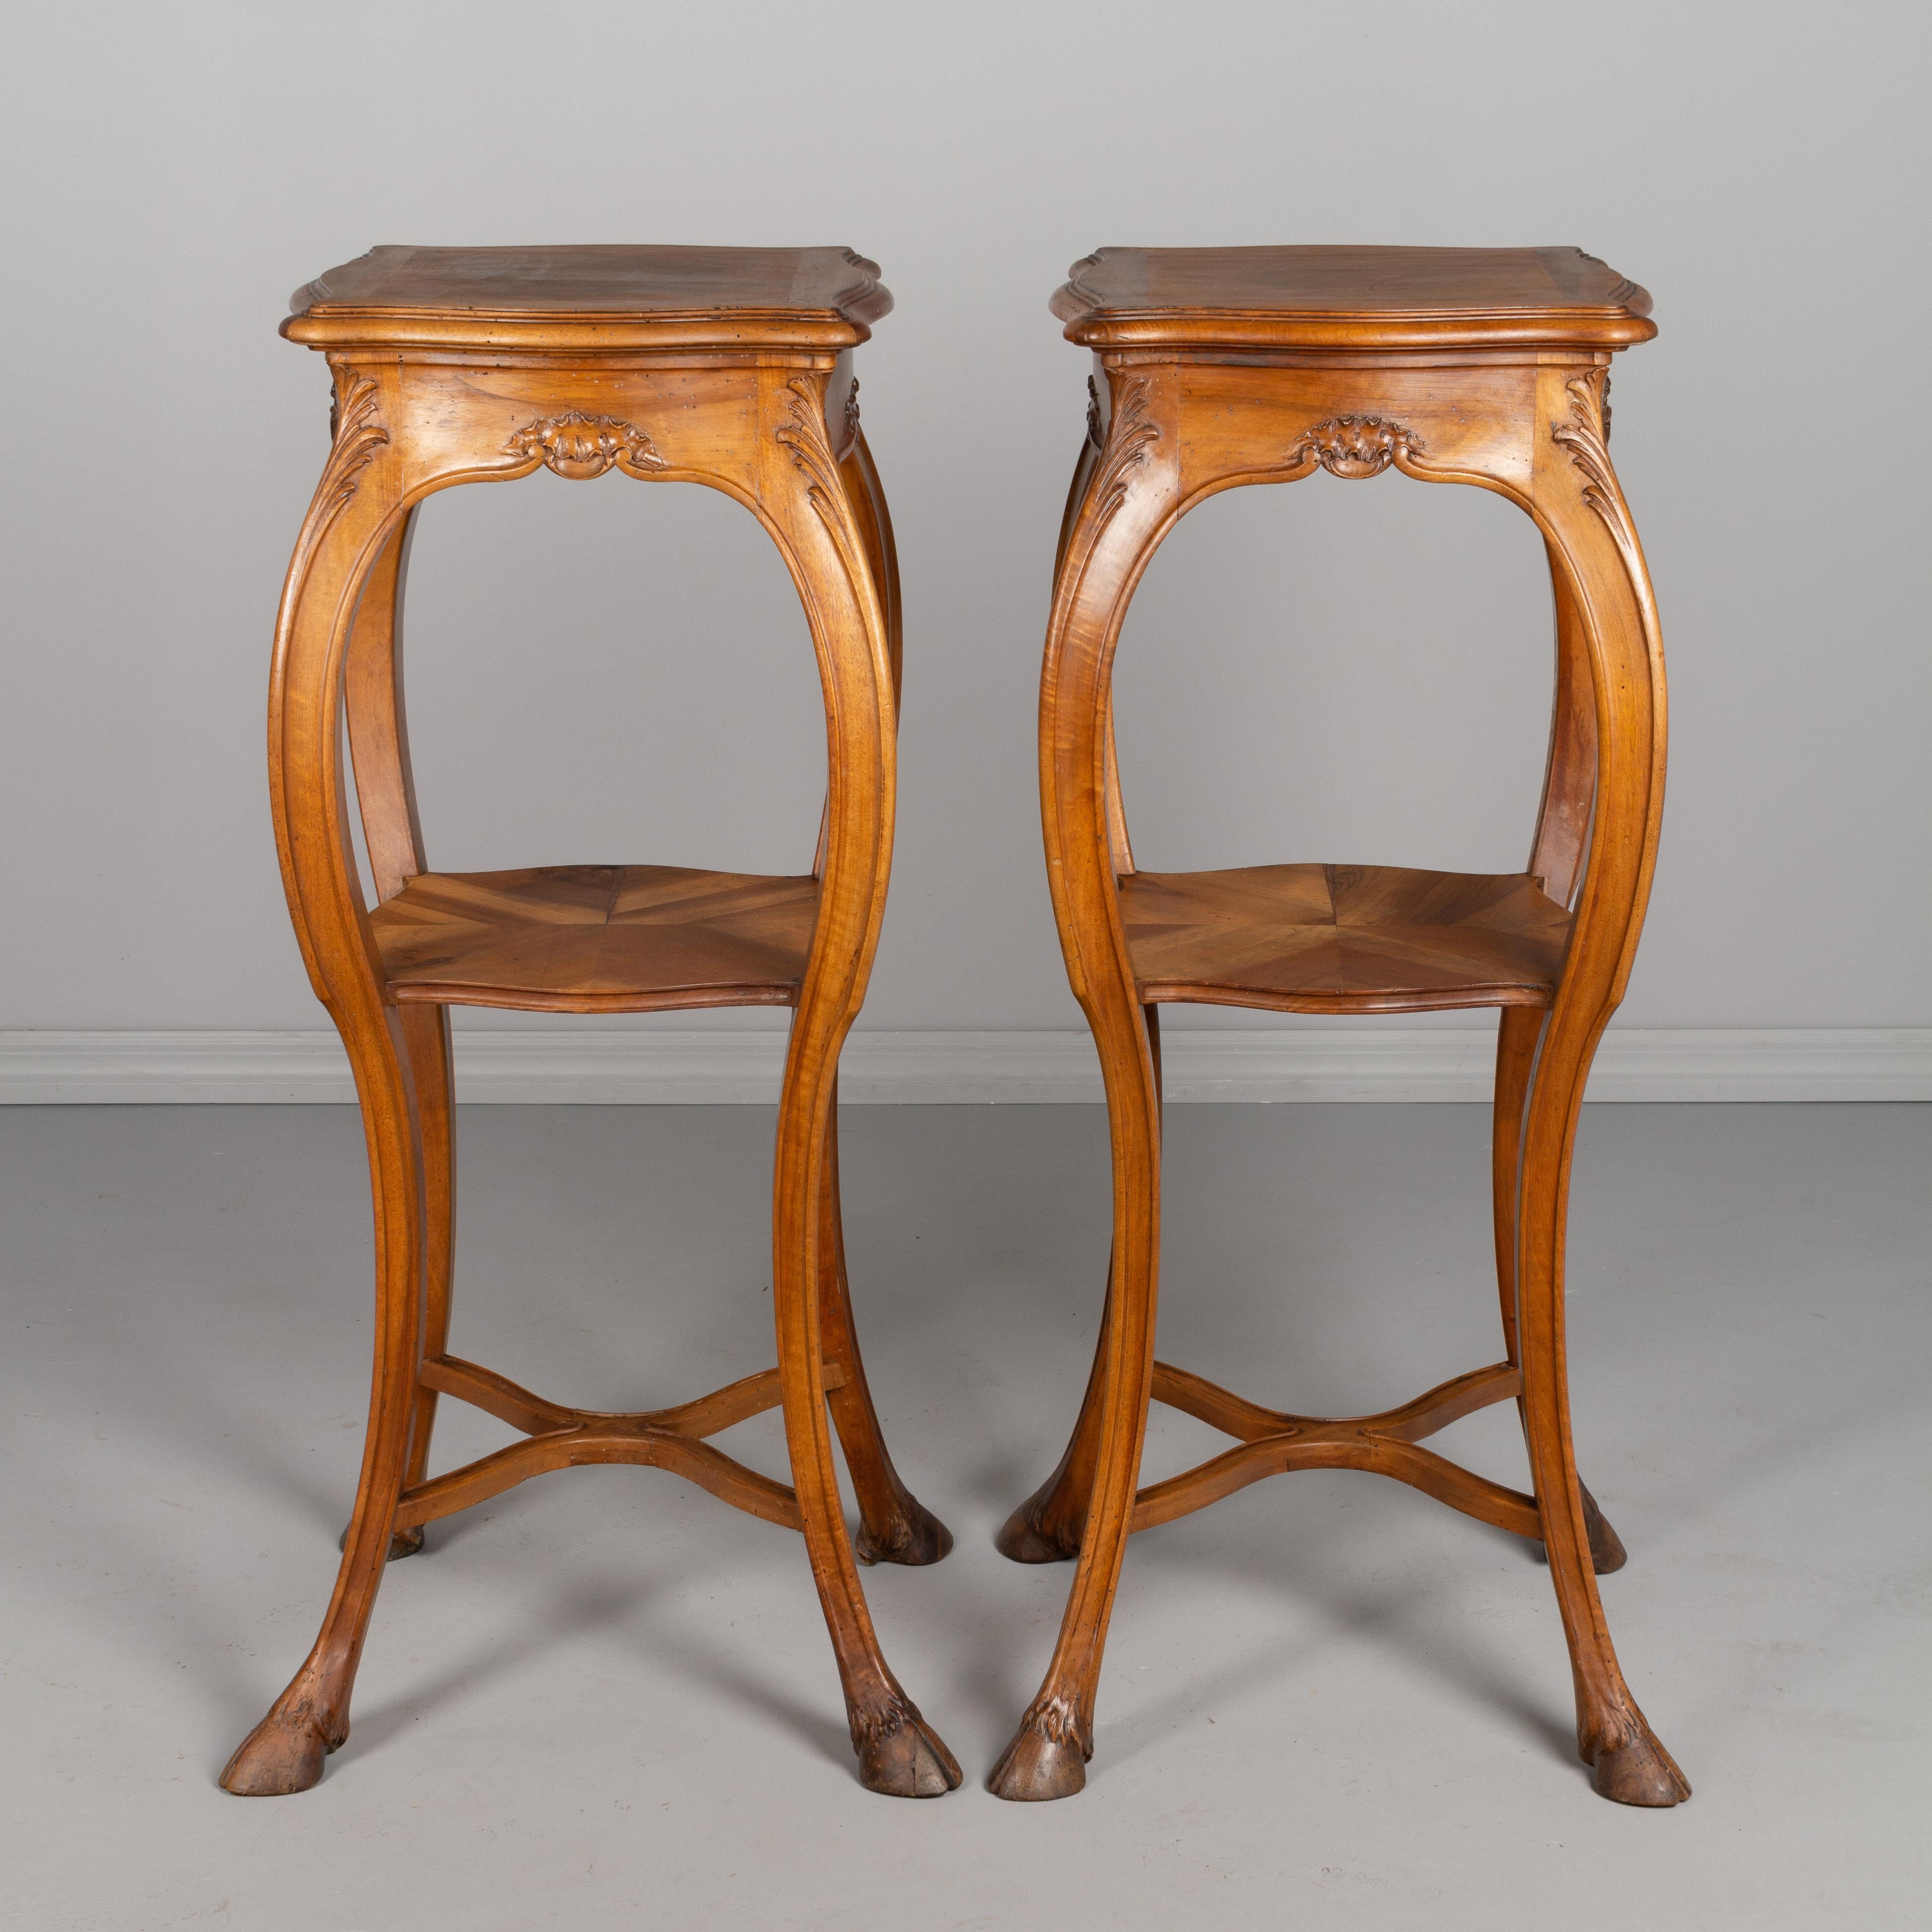 A pair of French Art Nouveau Louis XV style sellettes or tall pedestals mounted on very high feet. Made of walnut, with curved legs ending in carved deer hoofs. A dramatic matched pair for the display of plants or sculptures. Measures: Height 44